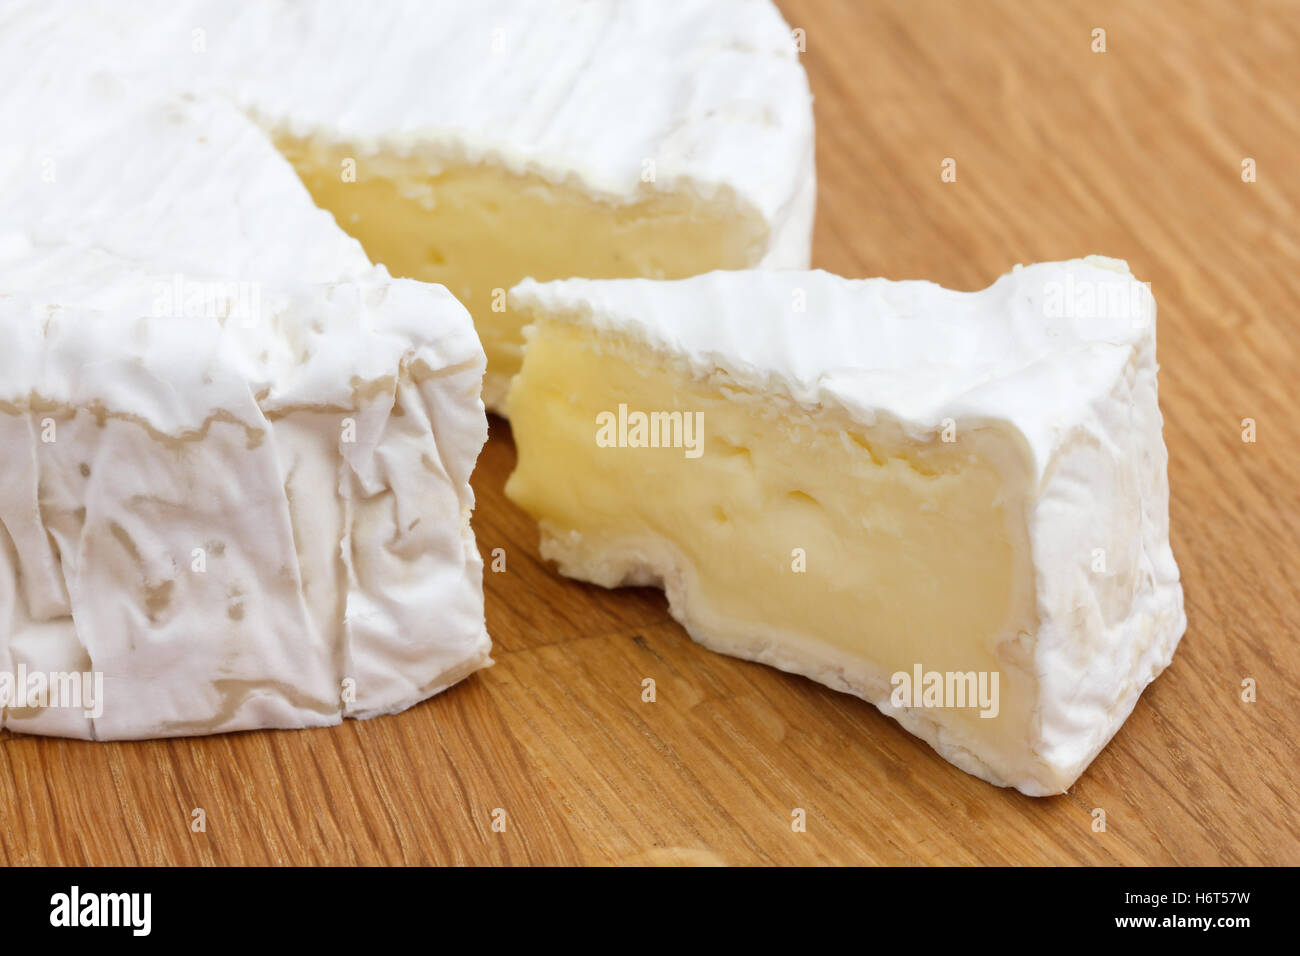 Slice of white cheese cut out of a big round on a wood surface. Stock Photo